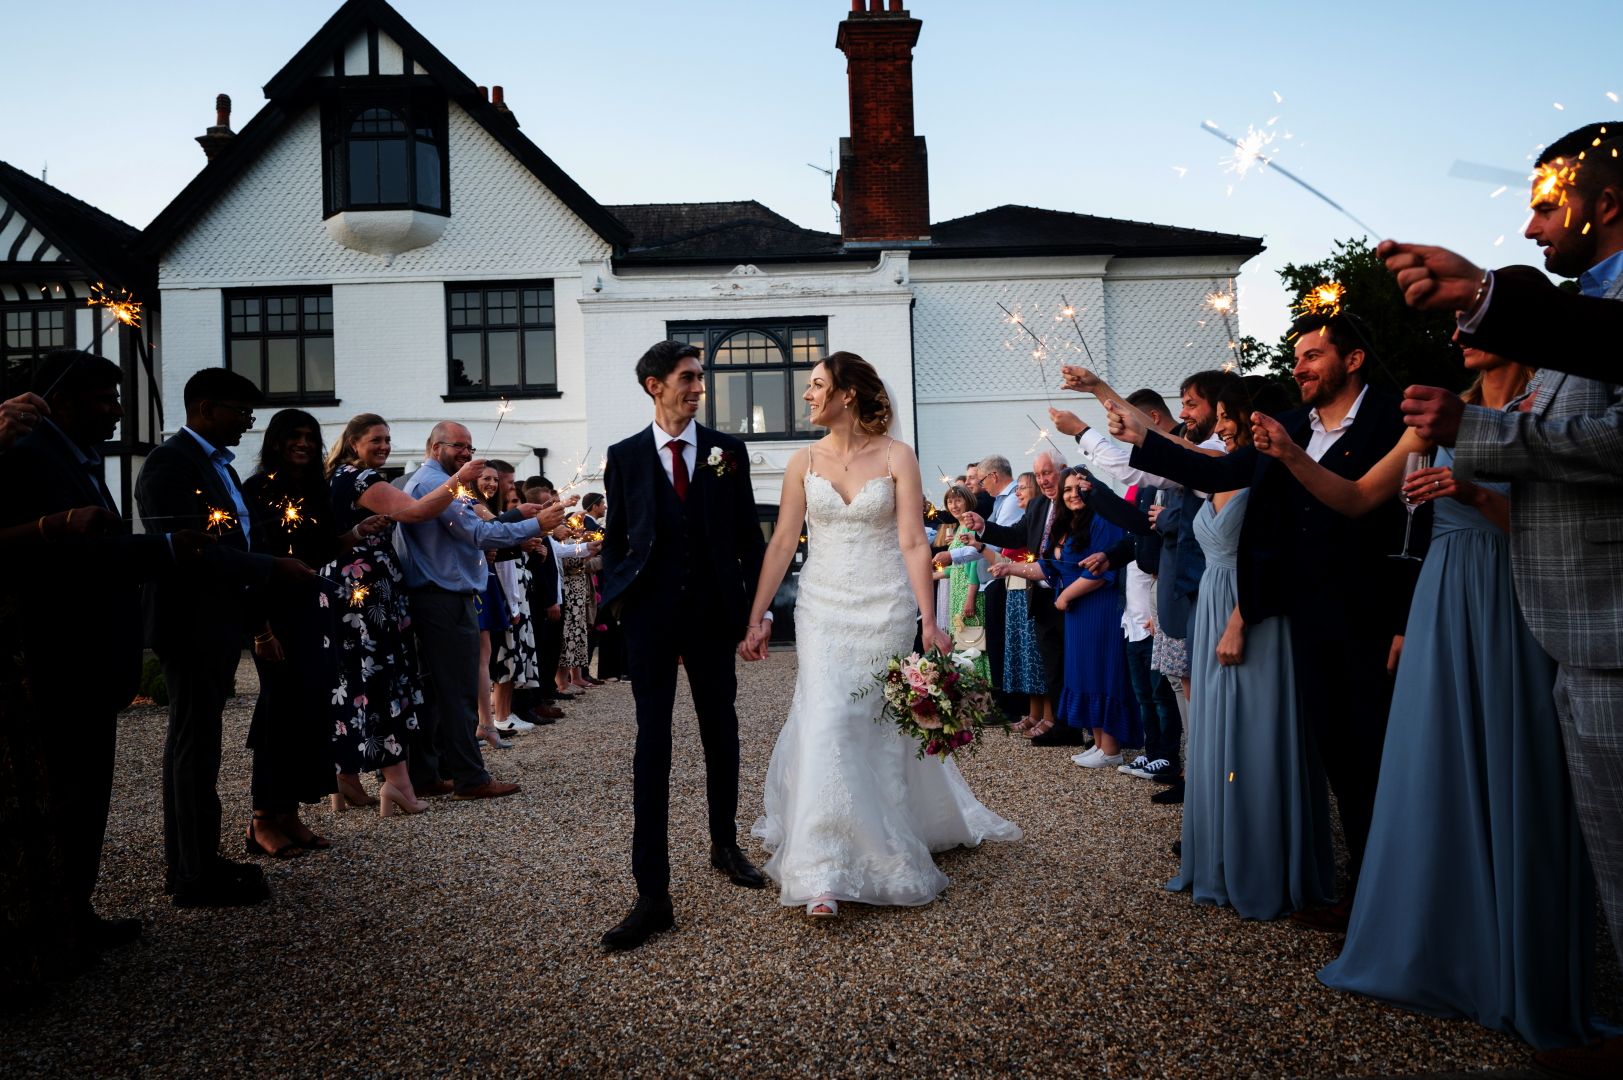 Sophie and Ross grinning during their sparkler aisle at dusk outside Swynford Manor. Photo by Fountain Photography.